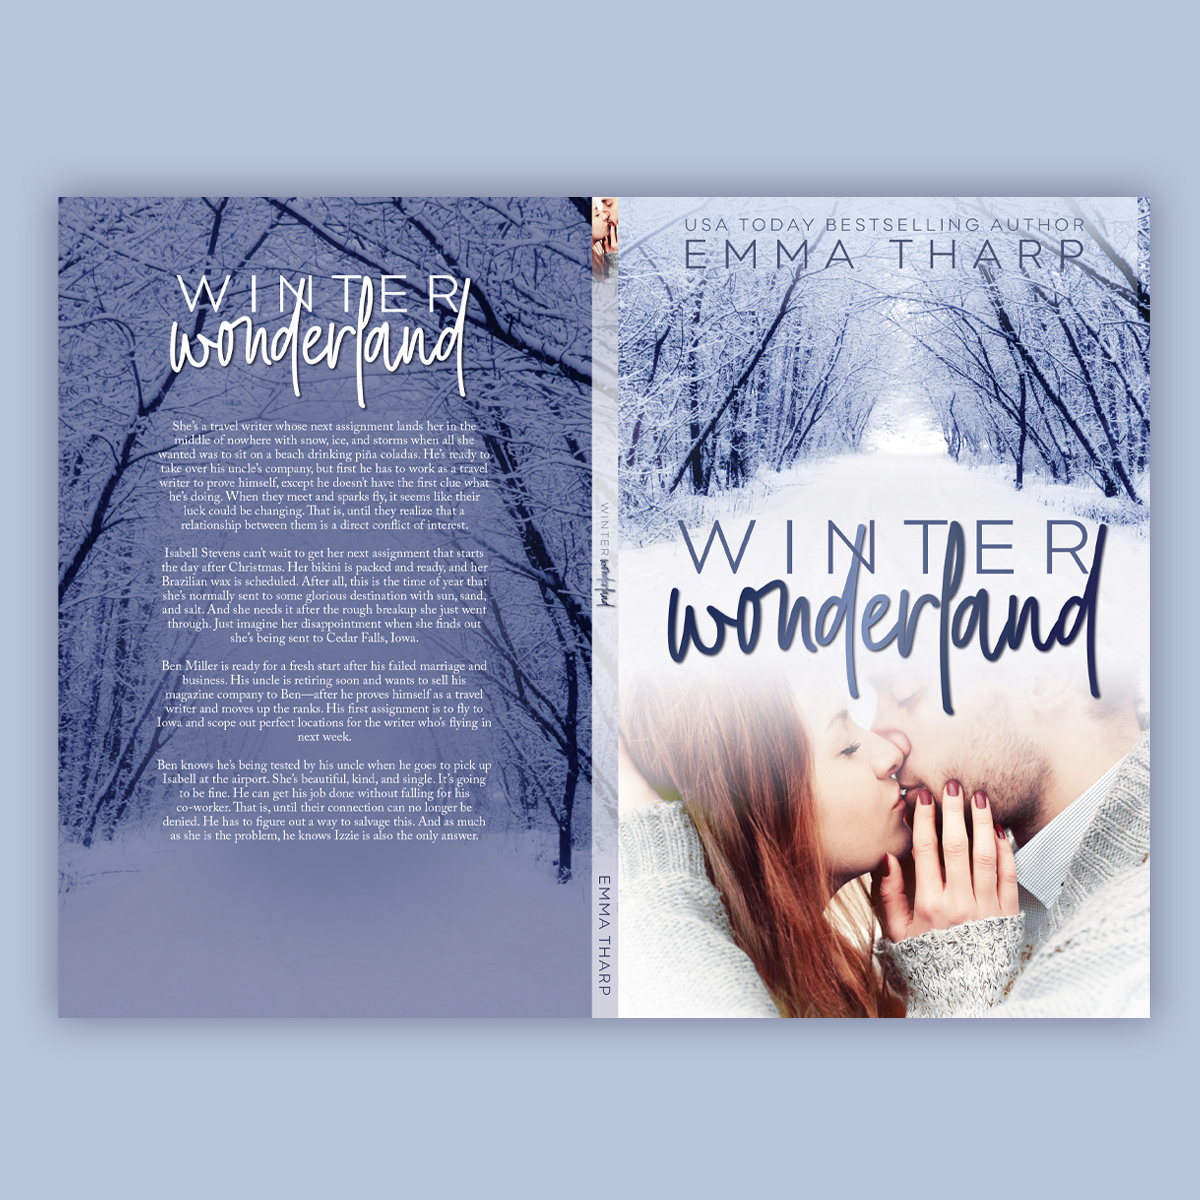 Print / Paperback Cover - Winter Wonderland, by Emma Tharp - Premade Holiday Book Cover from The Author Buddy